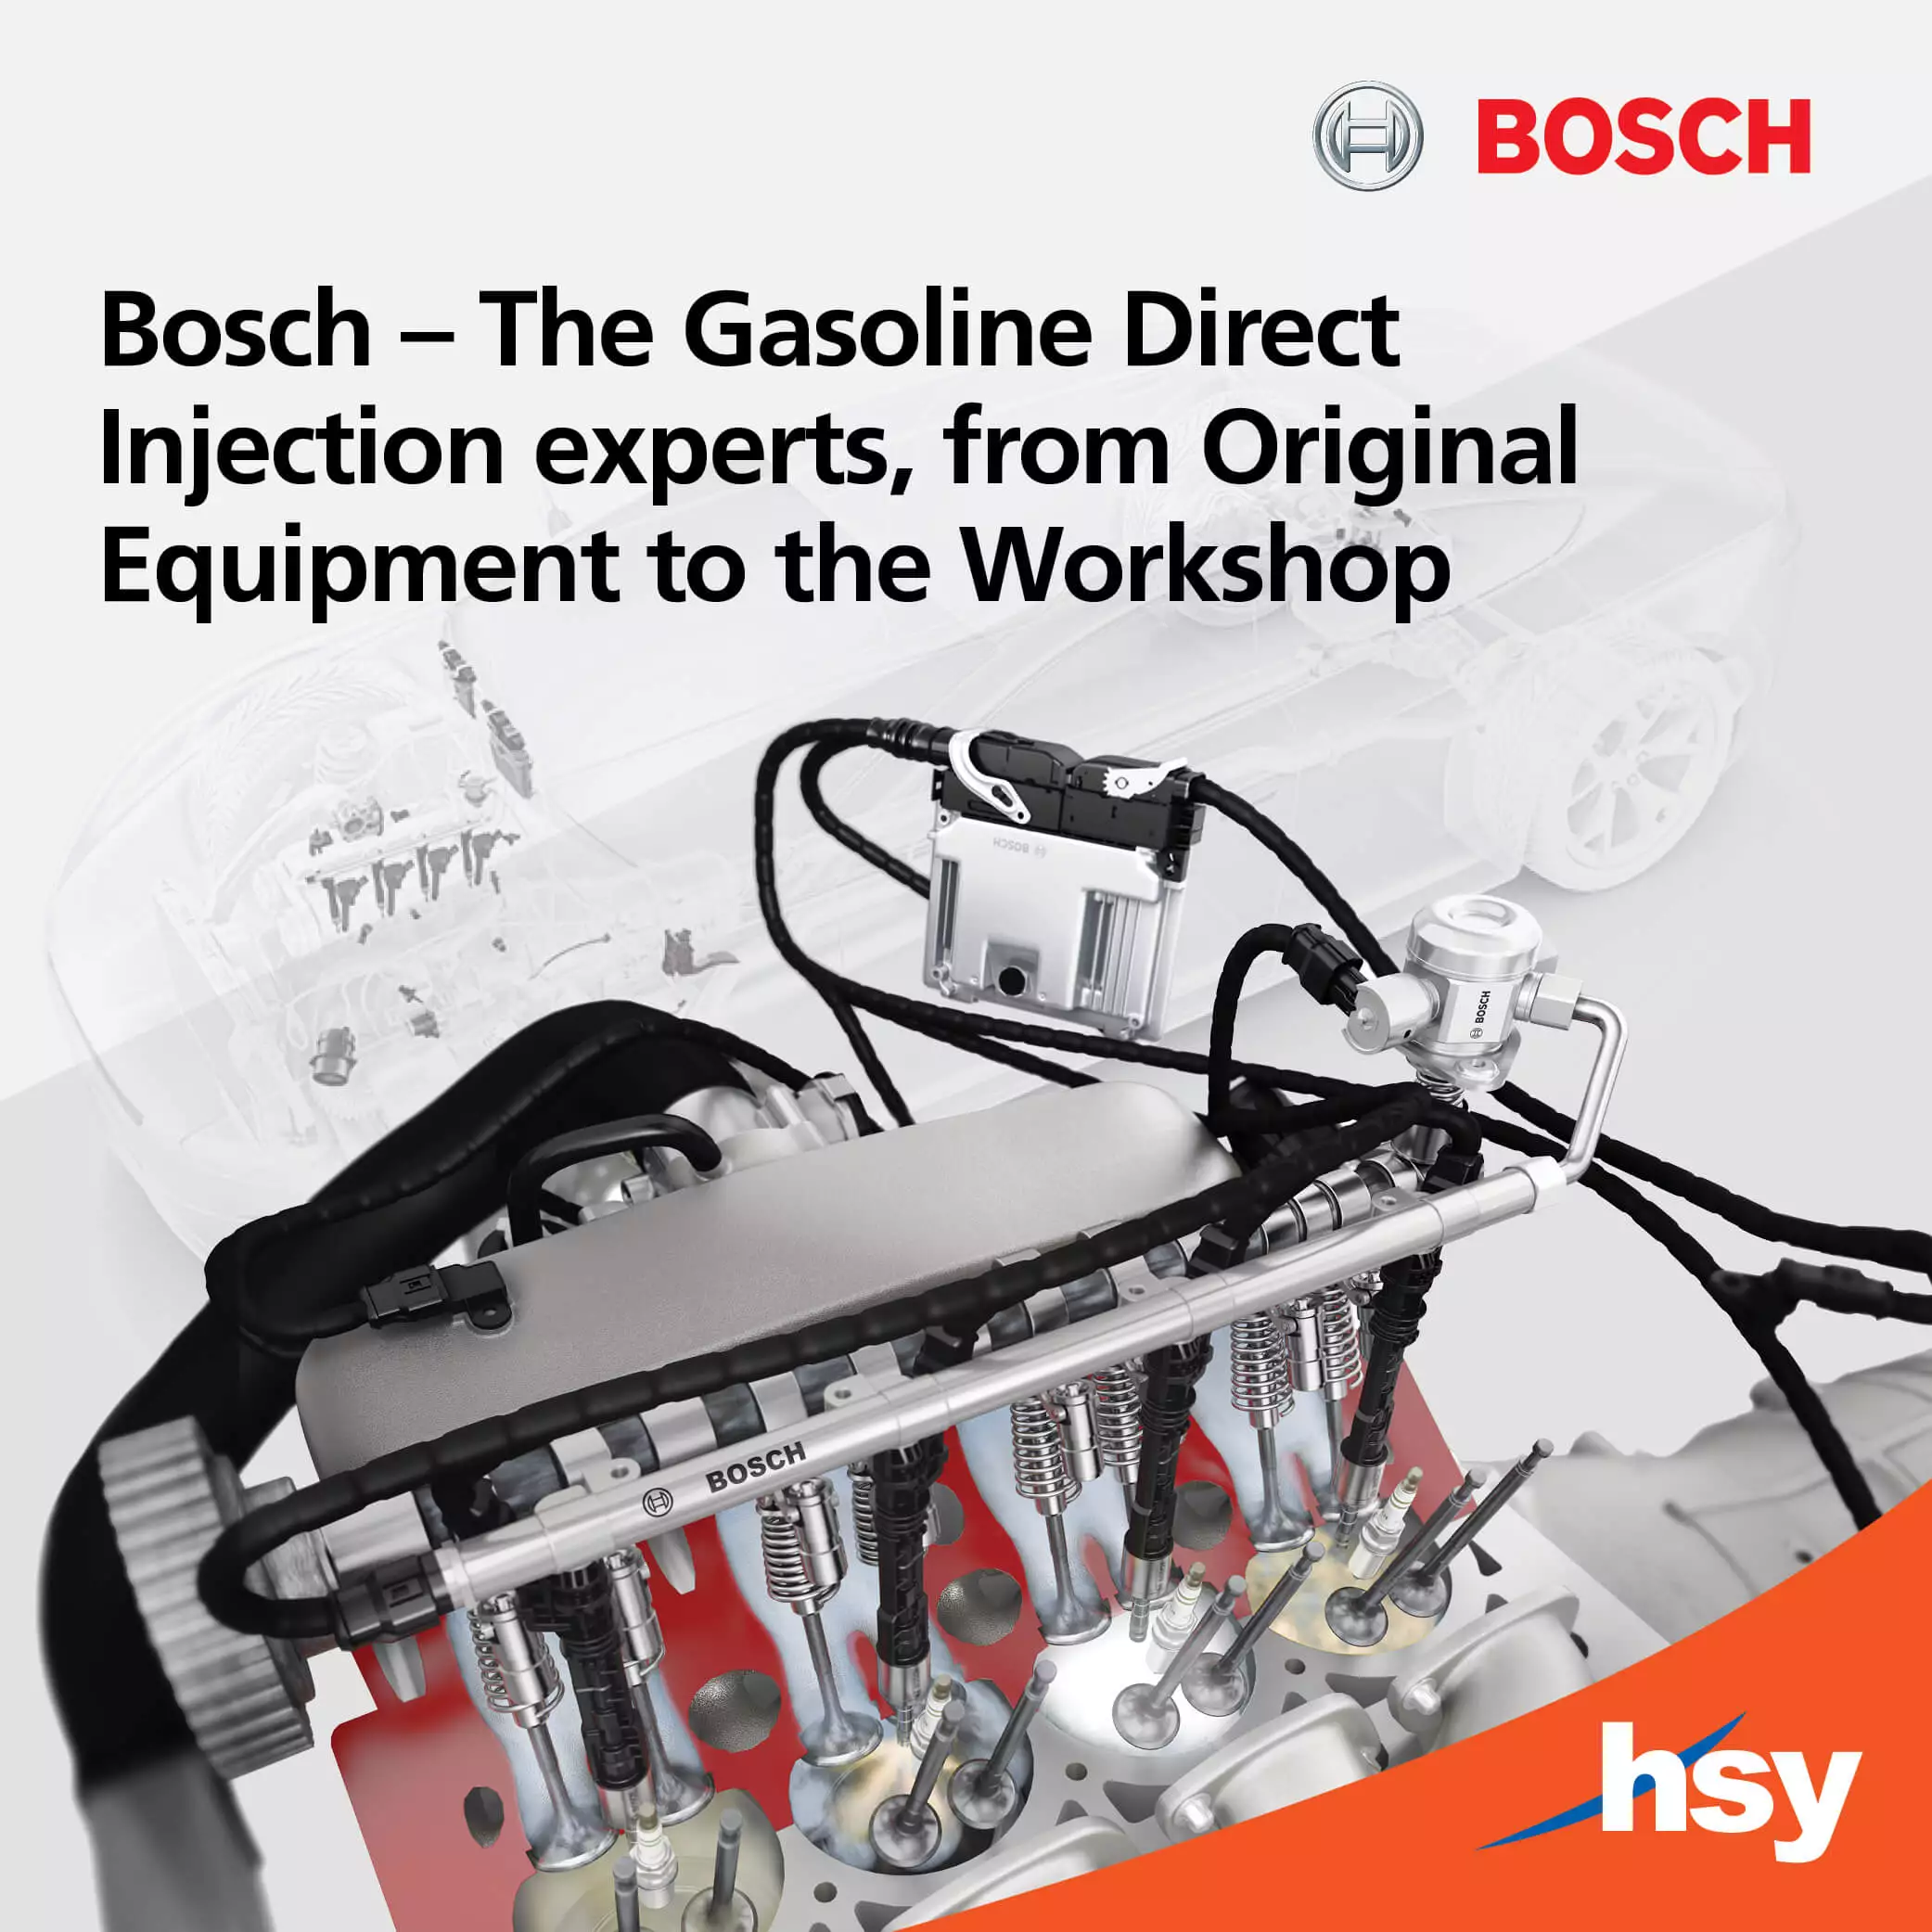 Bosch – The leader in Gasoline Direct Injection